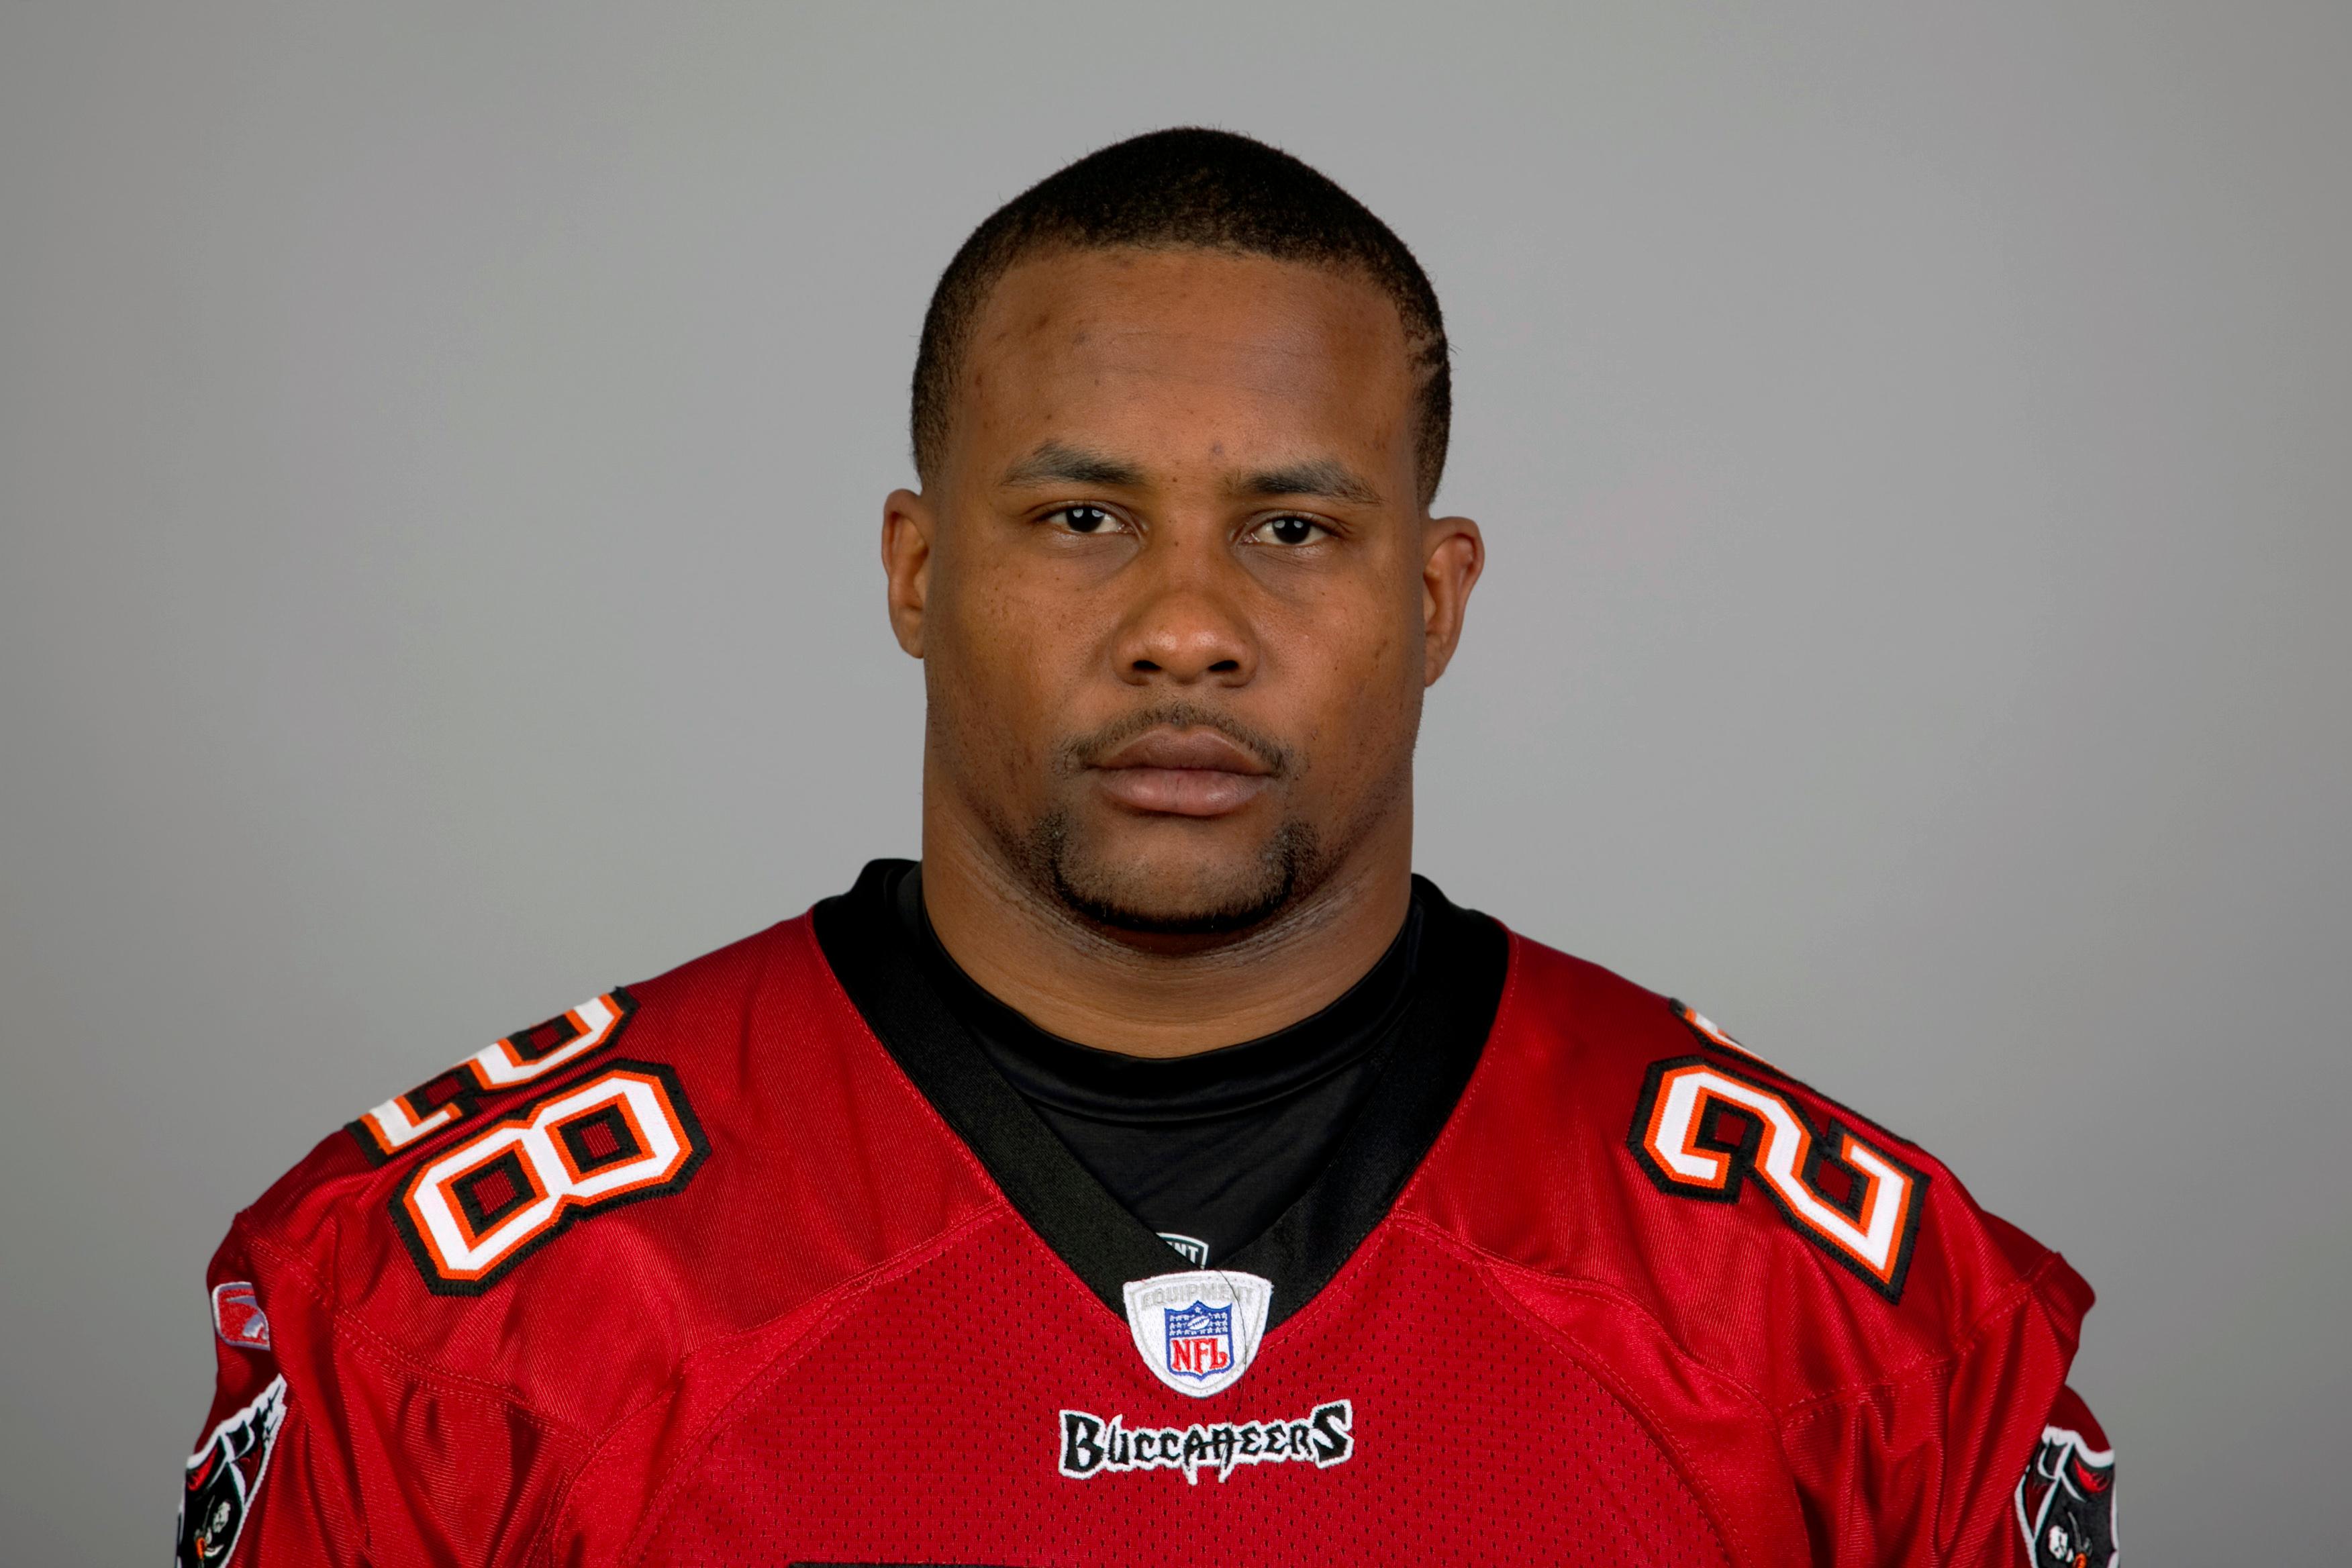 Former NFL Running Back Derrick Ward Charged With Robberies